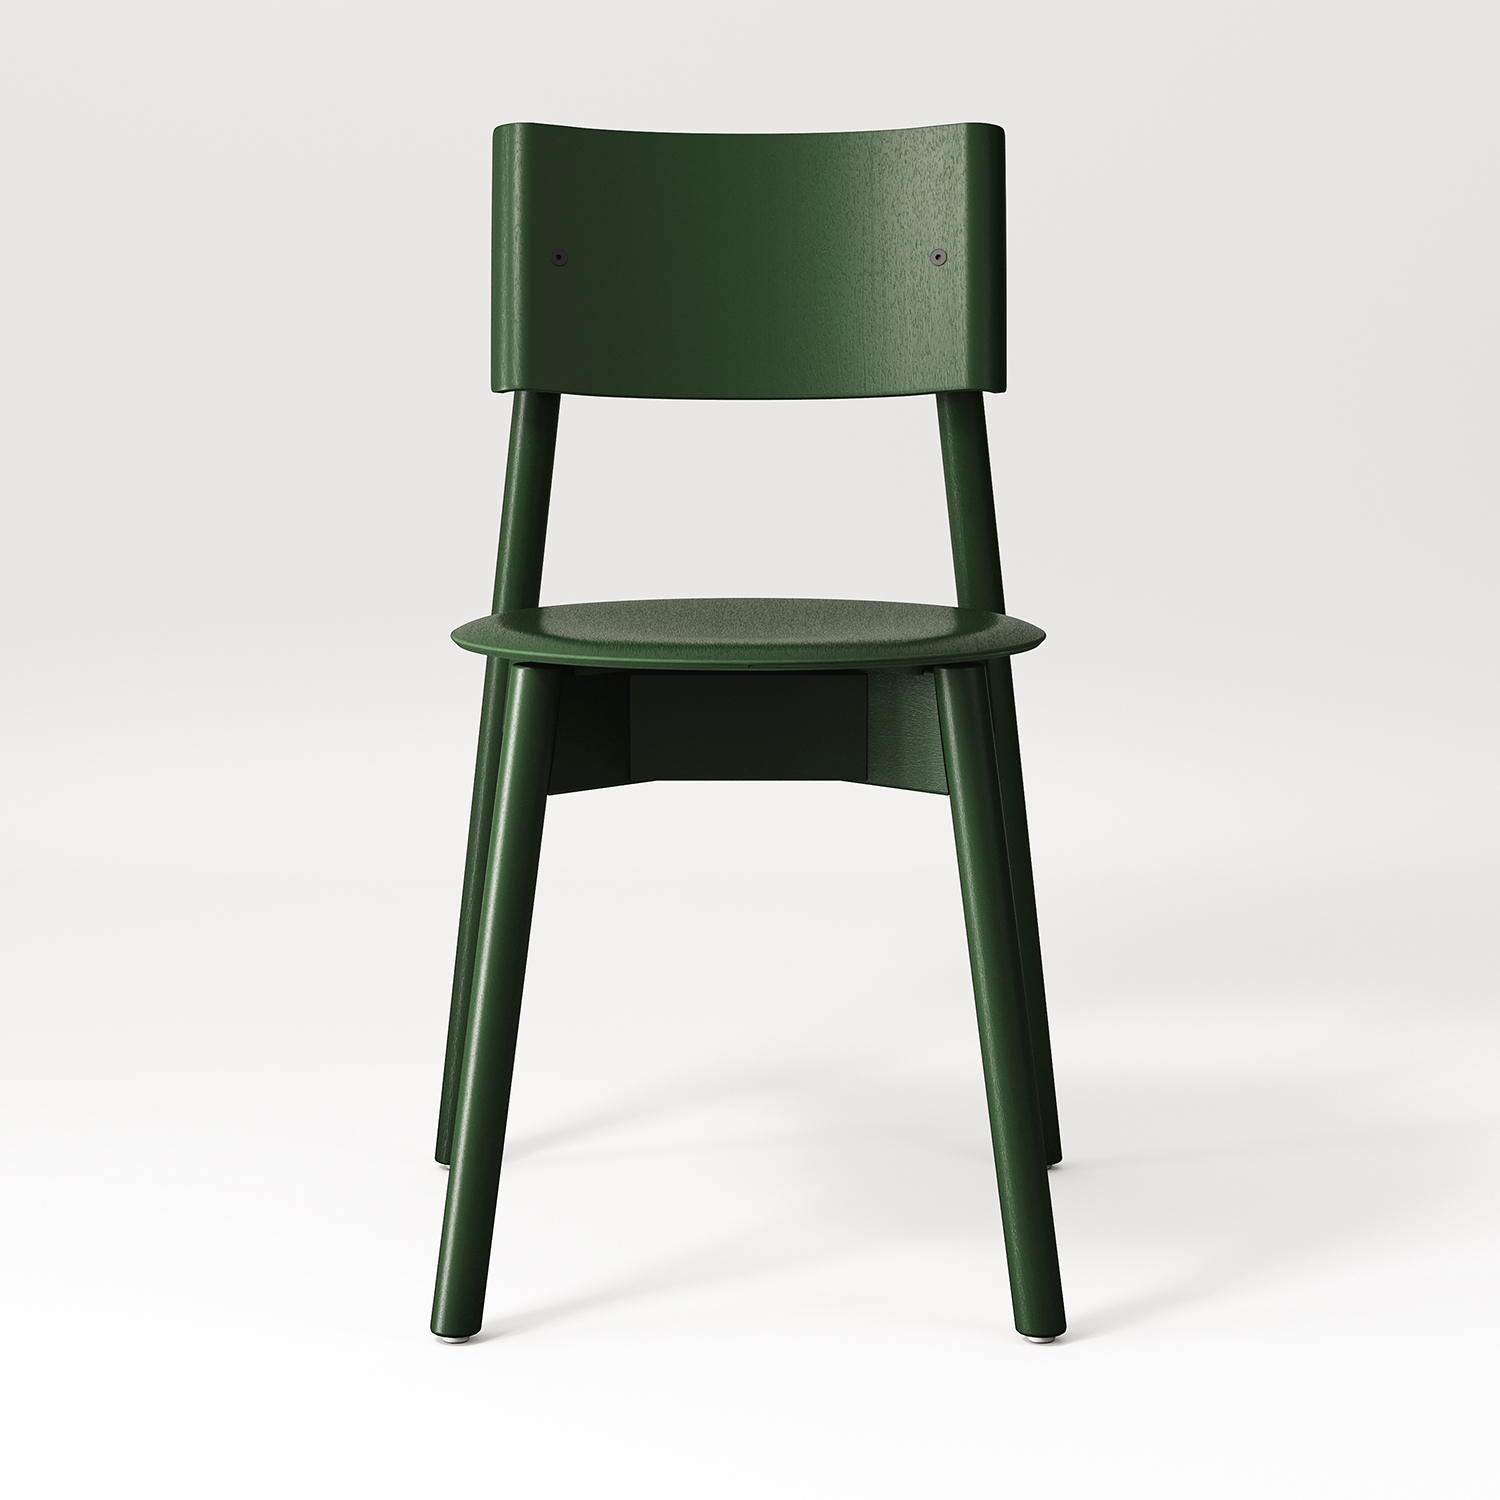 SSD full wood chair - eco-certified wood